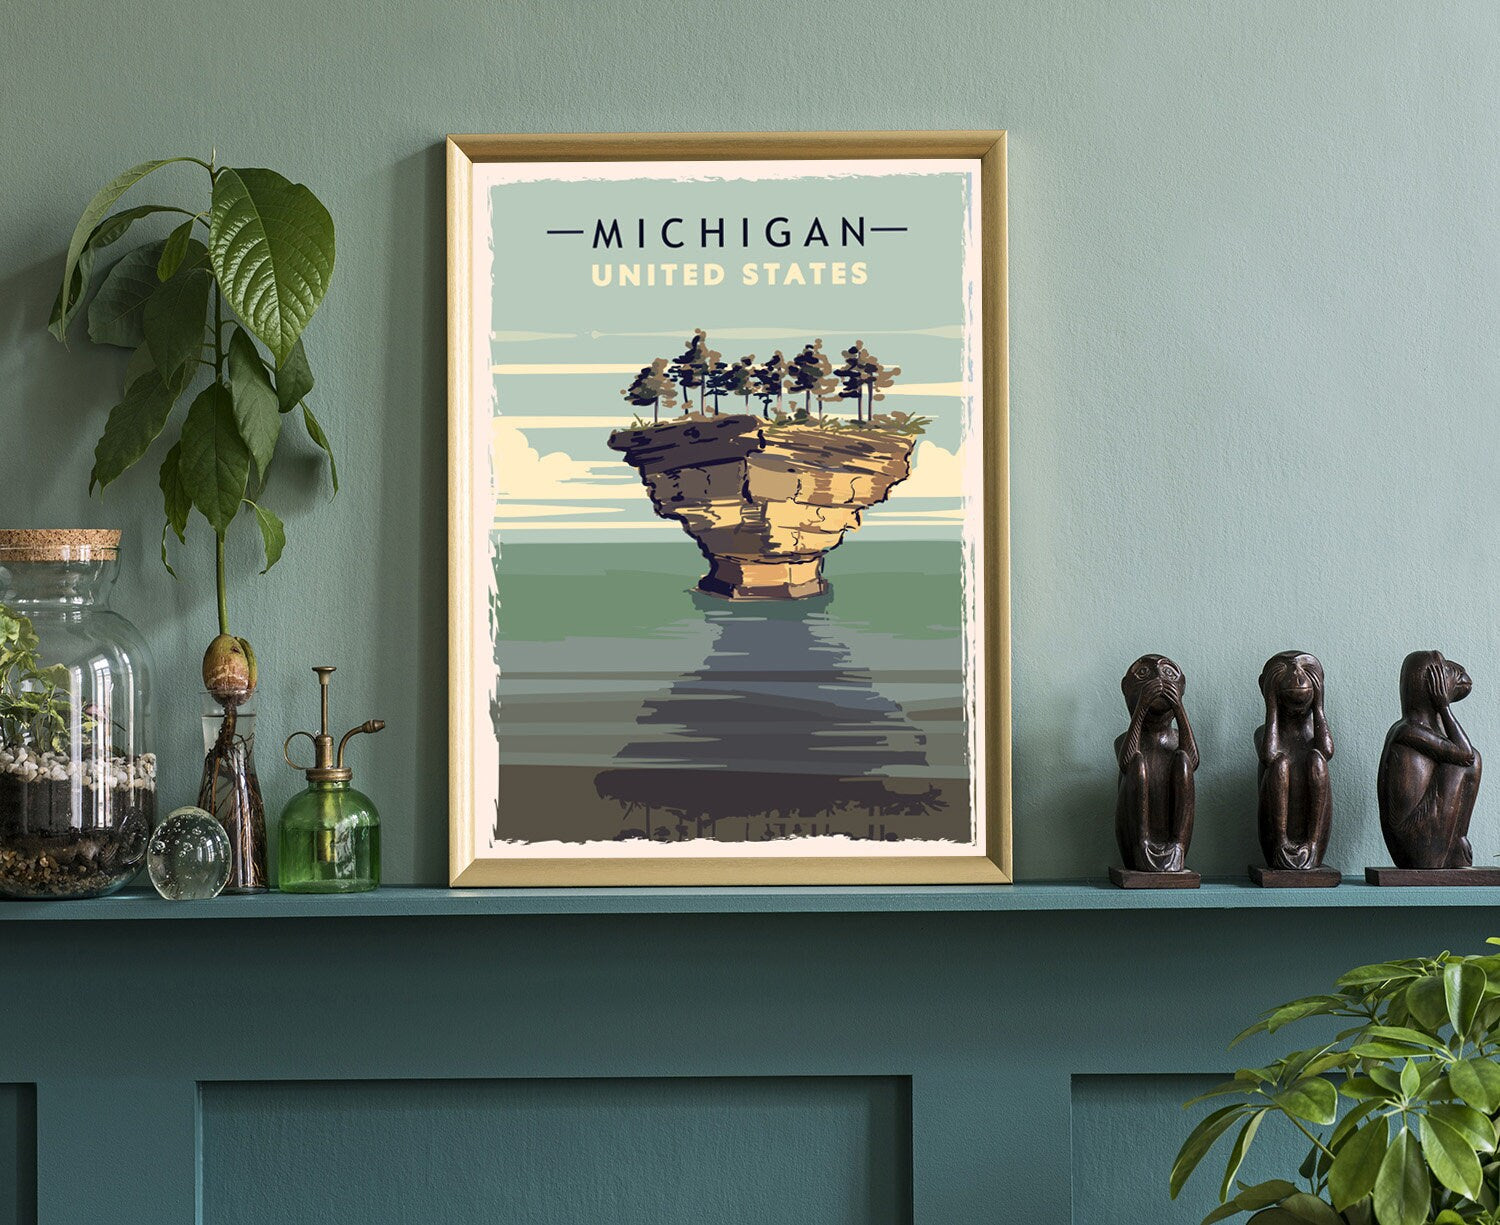 Retro Style Travel Poster, Michigan Vintage Rustic Poster Print, Home Wall Art, Office Wall Decor, Posters, Michigan, State Map Poster